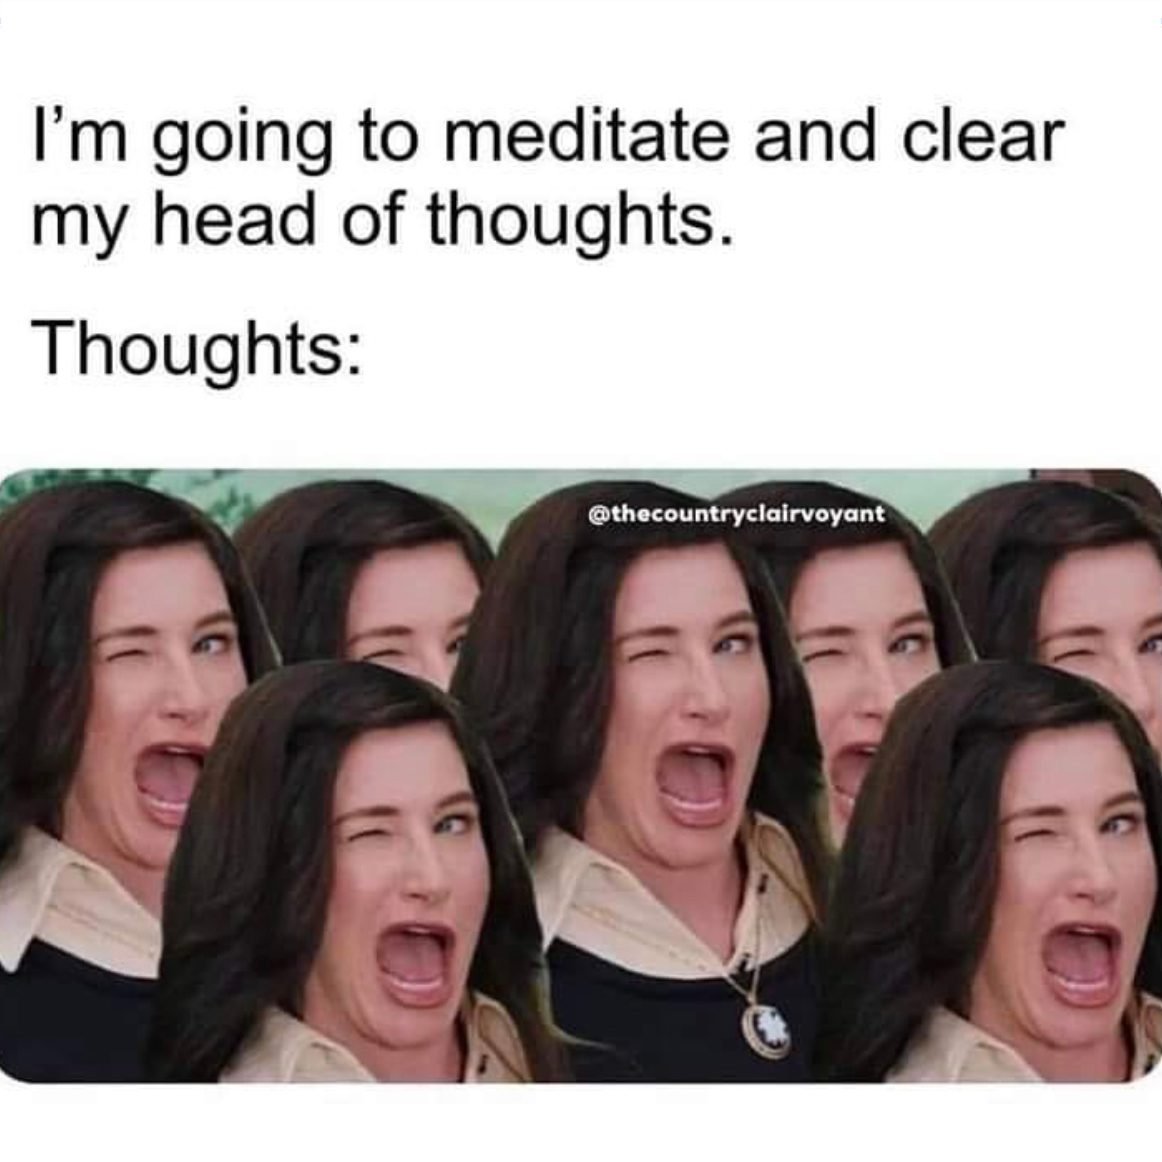 15 Funny Meditation Memes to Inspire You and Make You Laugh